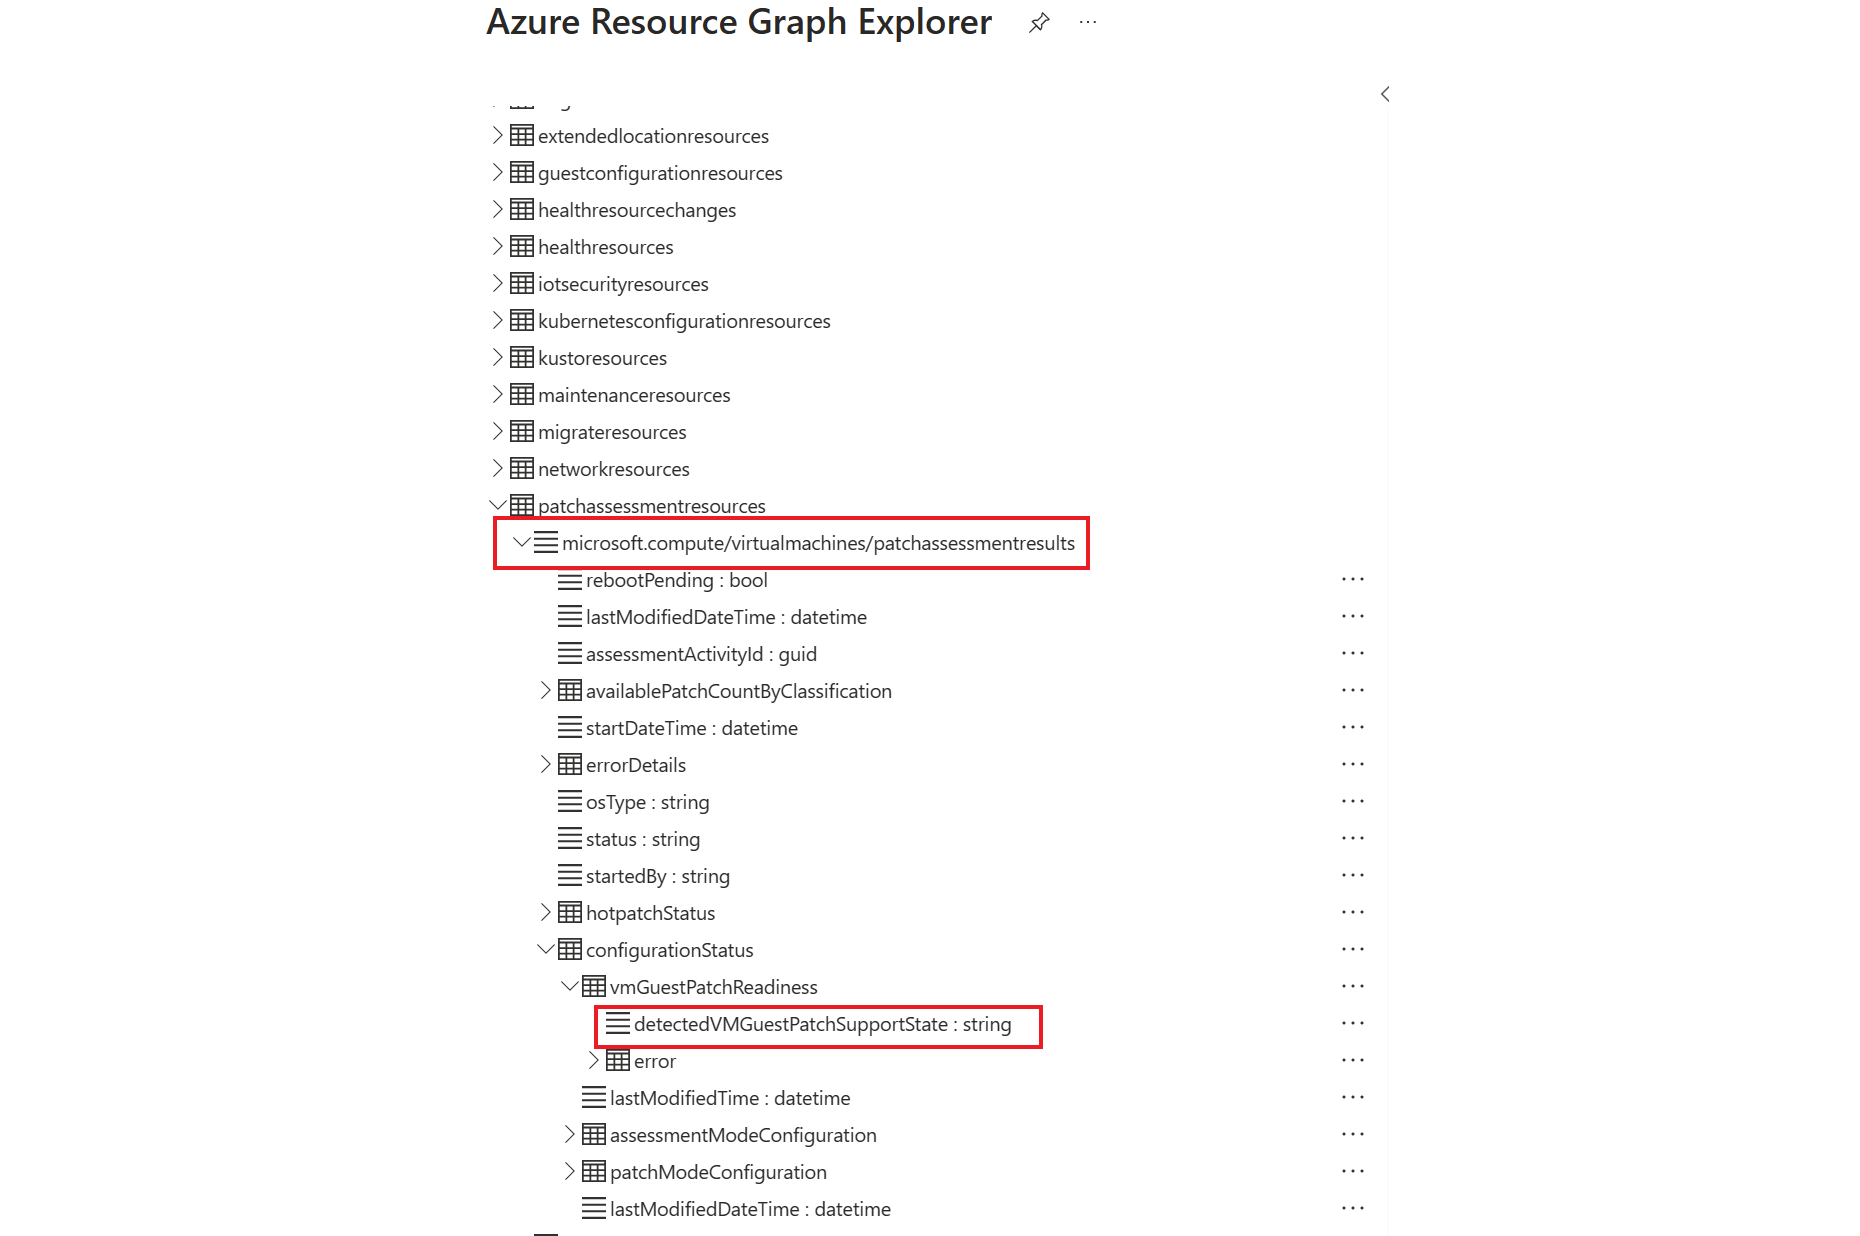 Screenshot that shows the resource in Azure Resource Graph Explorer.